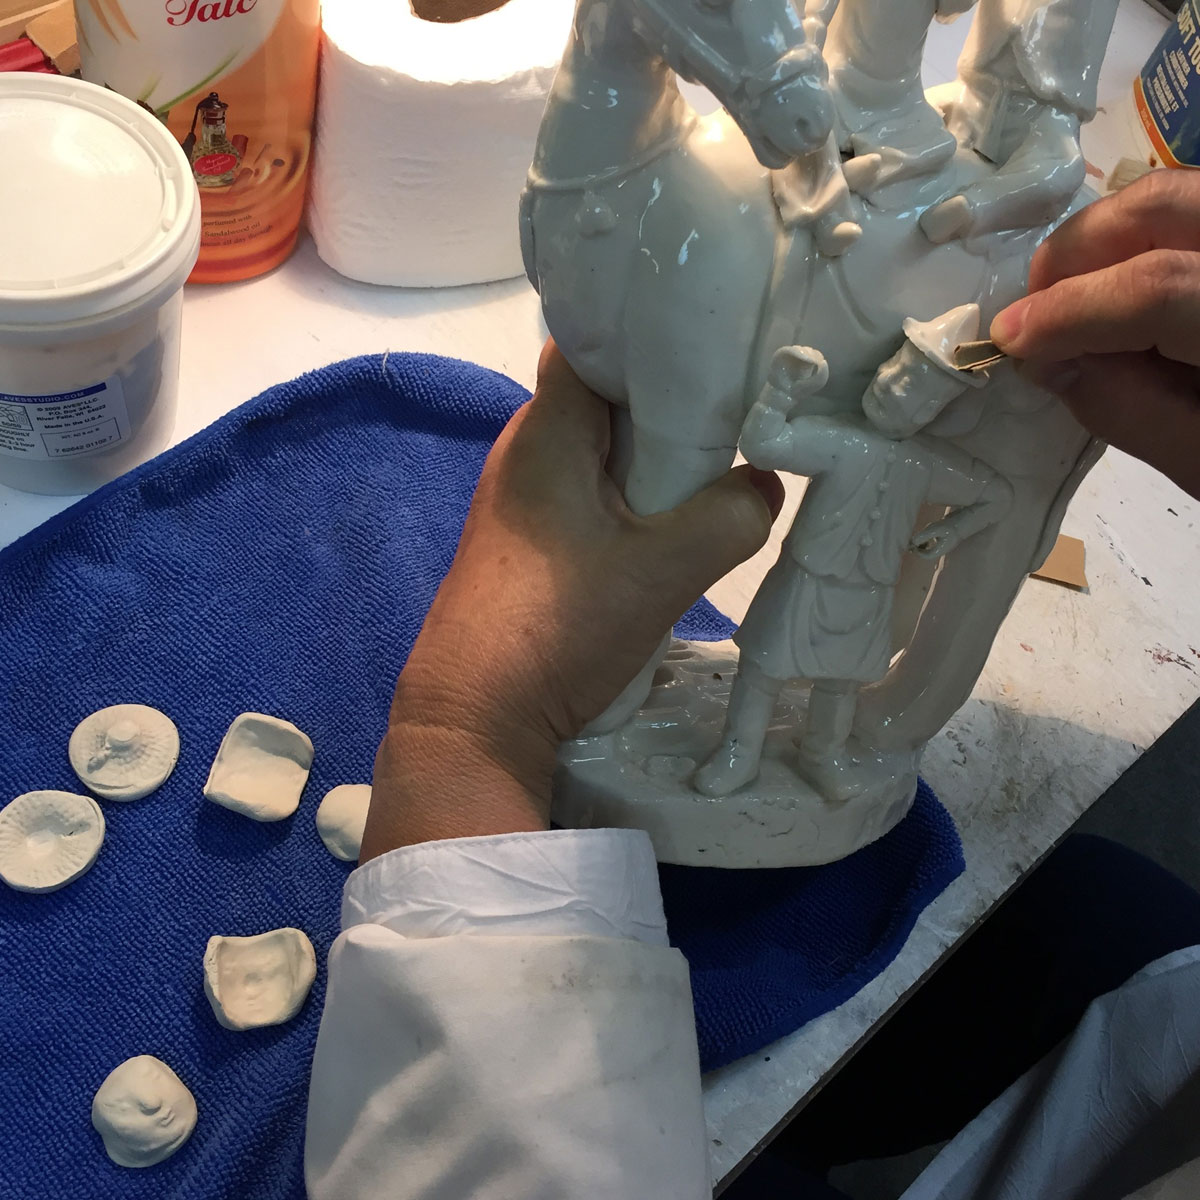 Hands using glass paper to shape the clay hat of a white porcelain figure group